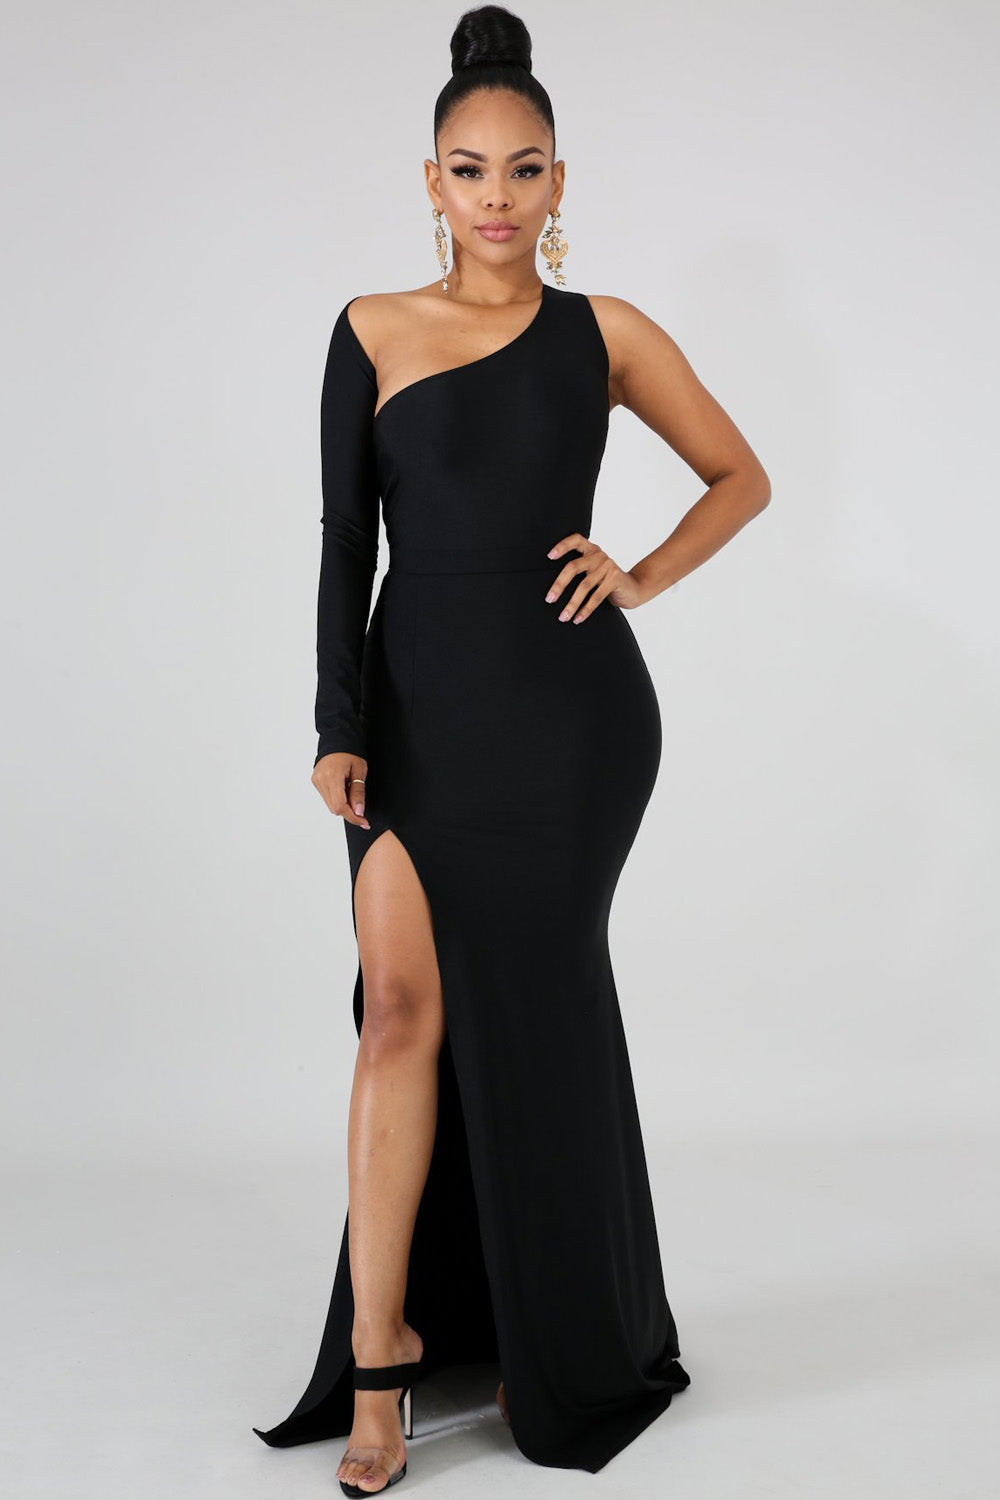 goPals full length black dress with single long sleeve, open back and thigh high slit. 